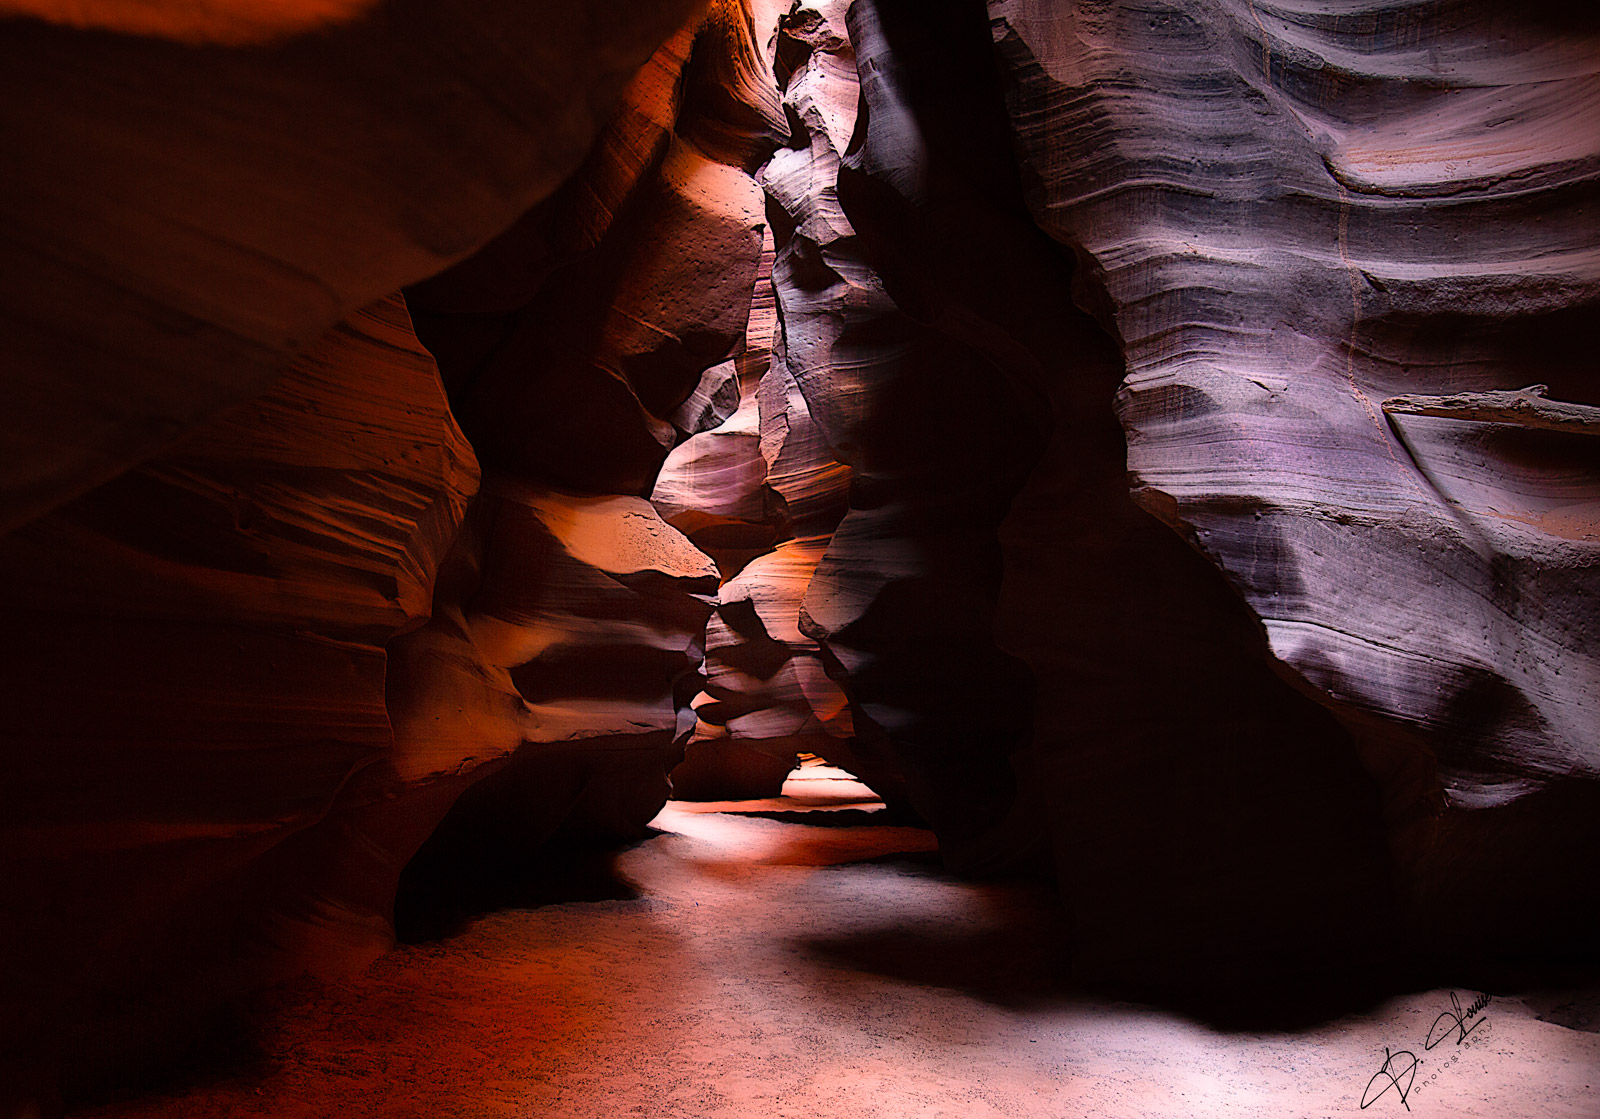 One of a series of images from Antelope Canyon. Mother nature's always impressive work carving out this chamber and these beautiful...